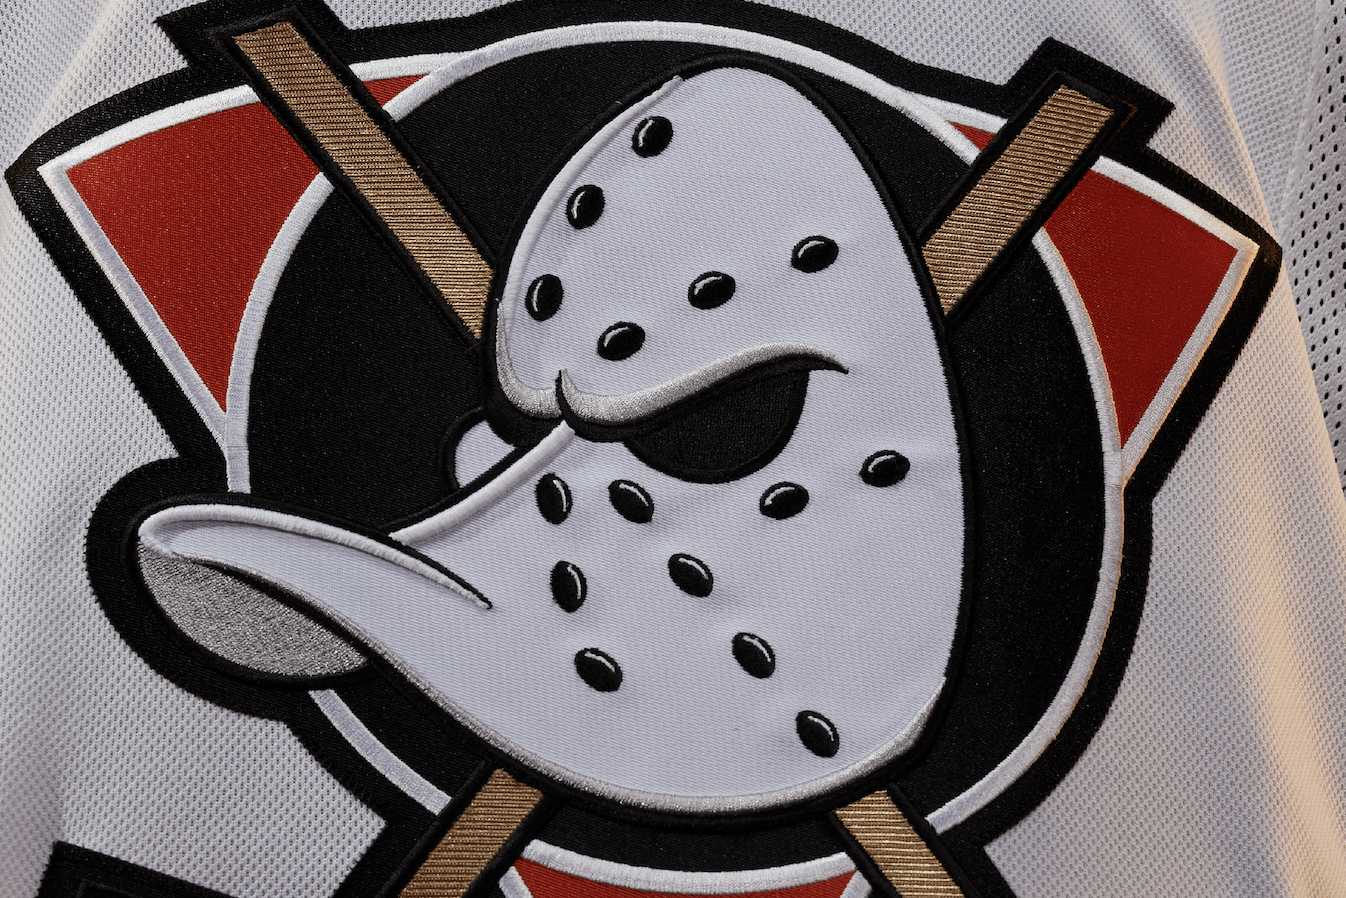 <p><span style="font-weight: 400">Set to hit the ice this season, a new line of hockey sweaters that call back to Stanley Cup-winning seasons of the past and beloved logos from bygone eras is coming to the National Hockey League. Debuting in November, the NHL’s Reverse Retro 2022 ADIZERO jerseys were designed by Adidas in tandem with the league and individual teams. An opportunity to reinvent iconic designs and call back to nostalgic NHL moments, the Reverse Retro jerseys are the result of an extensive collaboration process that determined the most sought-after and creative looks for each team, according to </span><span style="font-weight: 400">Adidas Hockey senior director Dan Near.</span></p>
<p><span style="font-weight: 400">“It’s always exciting to go through this process because each jersey is like a time capsule to an incredible moment in a franchise’s history," Near tells InsideHook. "Those nostalgic nods mixed with modern design choices are really the secret sauce for Reverse Retro.”</span></p>
<p>With some insights on the design process from Near, here's a look at our 10 favorite Reverse Retro jerseys that the NHL and Adidas stitched up for the 2022-23 season. (Find a favorite? Head to <a href="http://adidas.com">Adidas</a> or the <a href="https://shop.nhl.com/">NHL</a> to cop it on November 15.)</p>